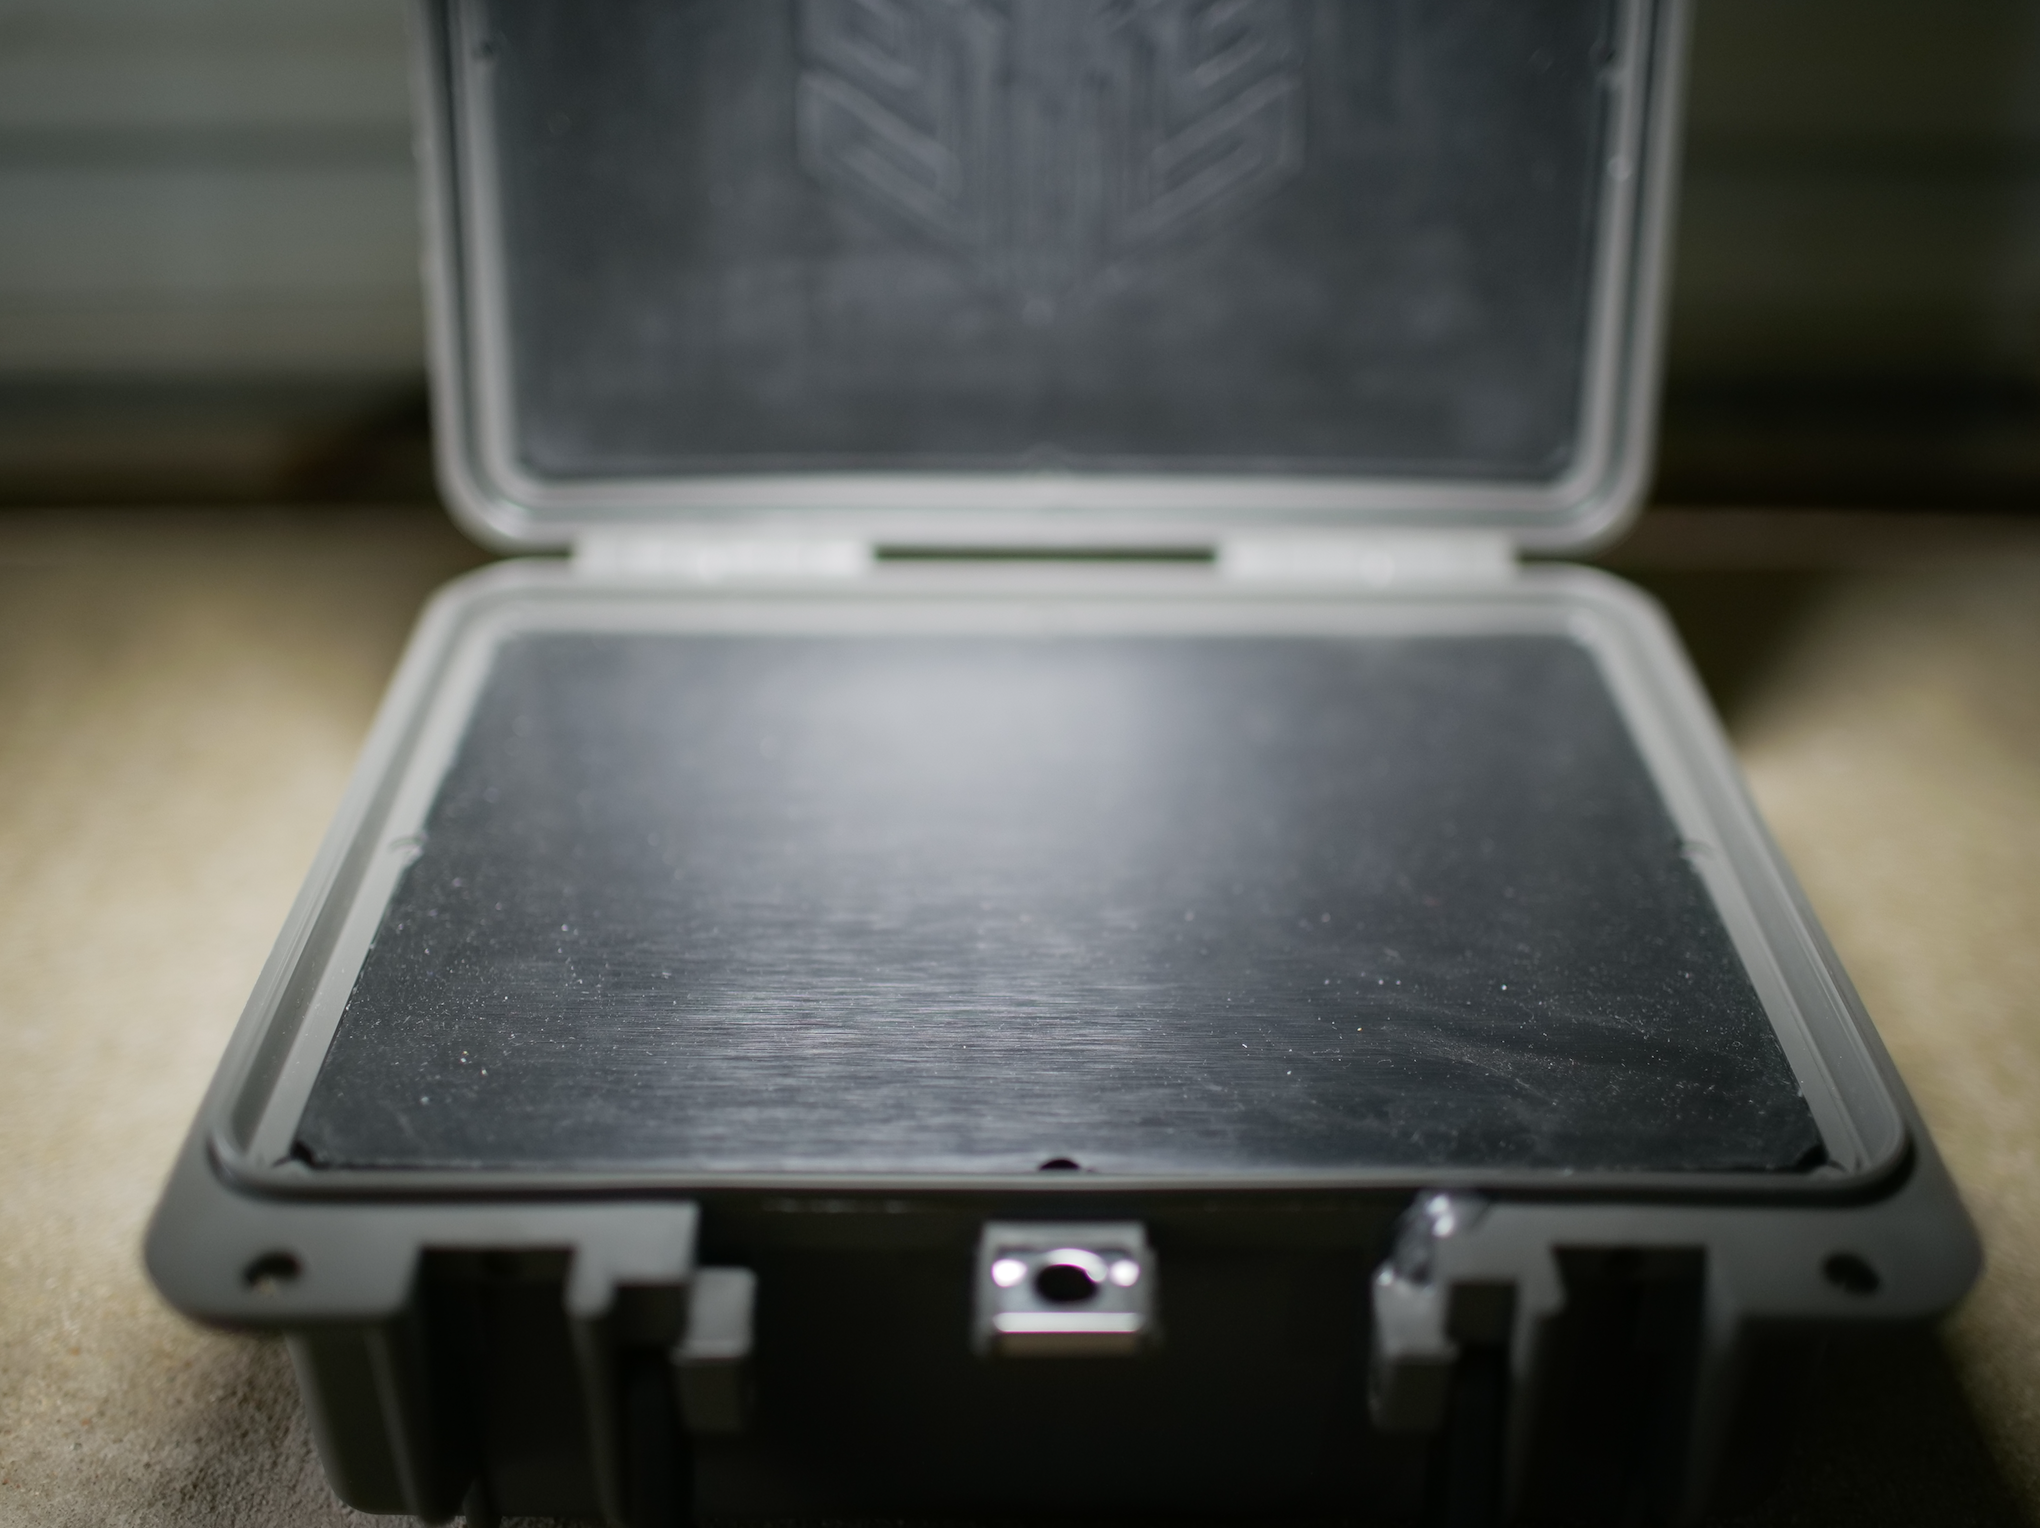 Kraken Case Company Launches The Next Generation of Case Storage